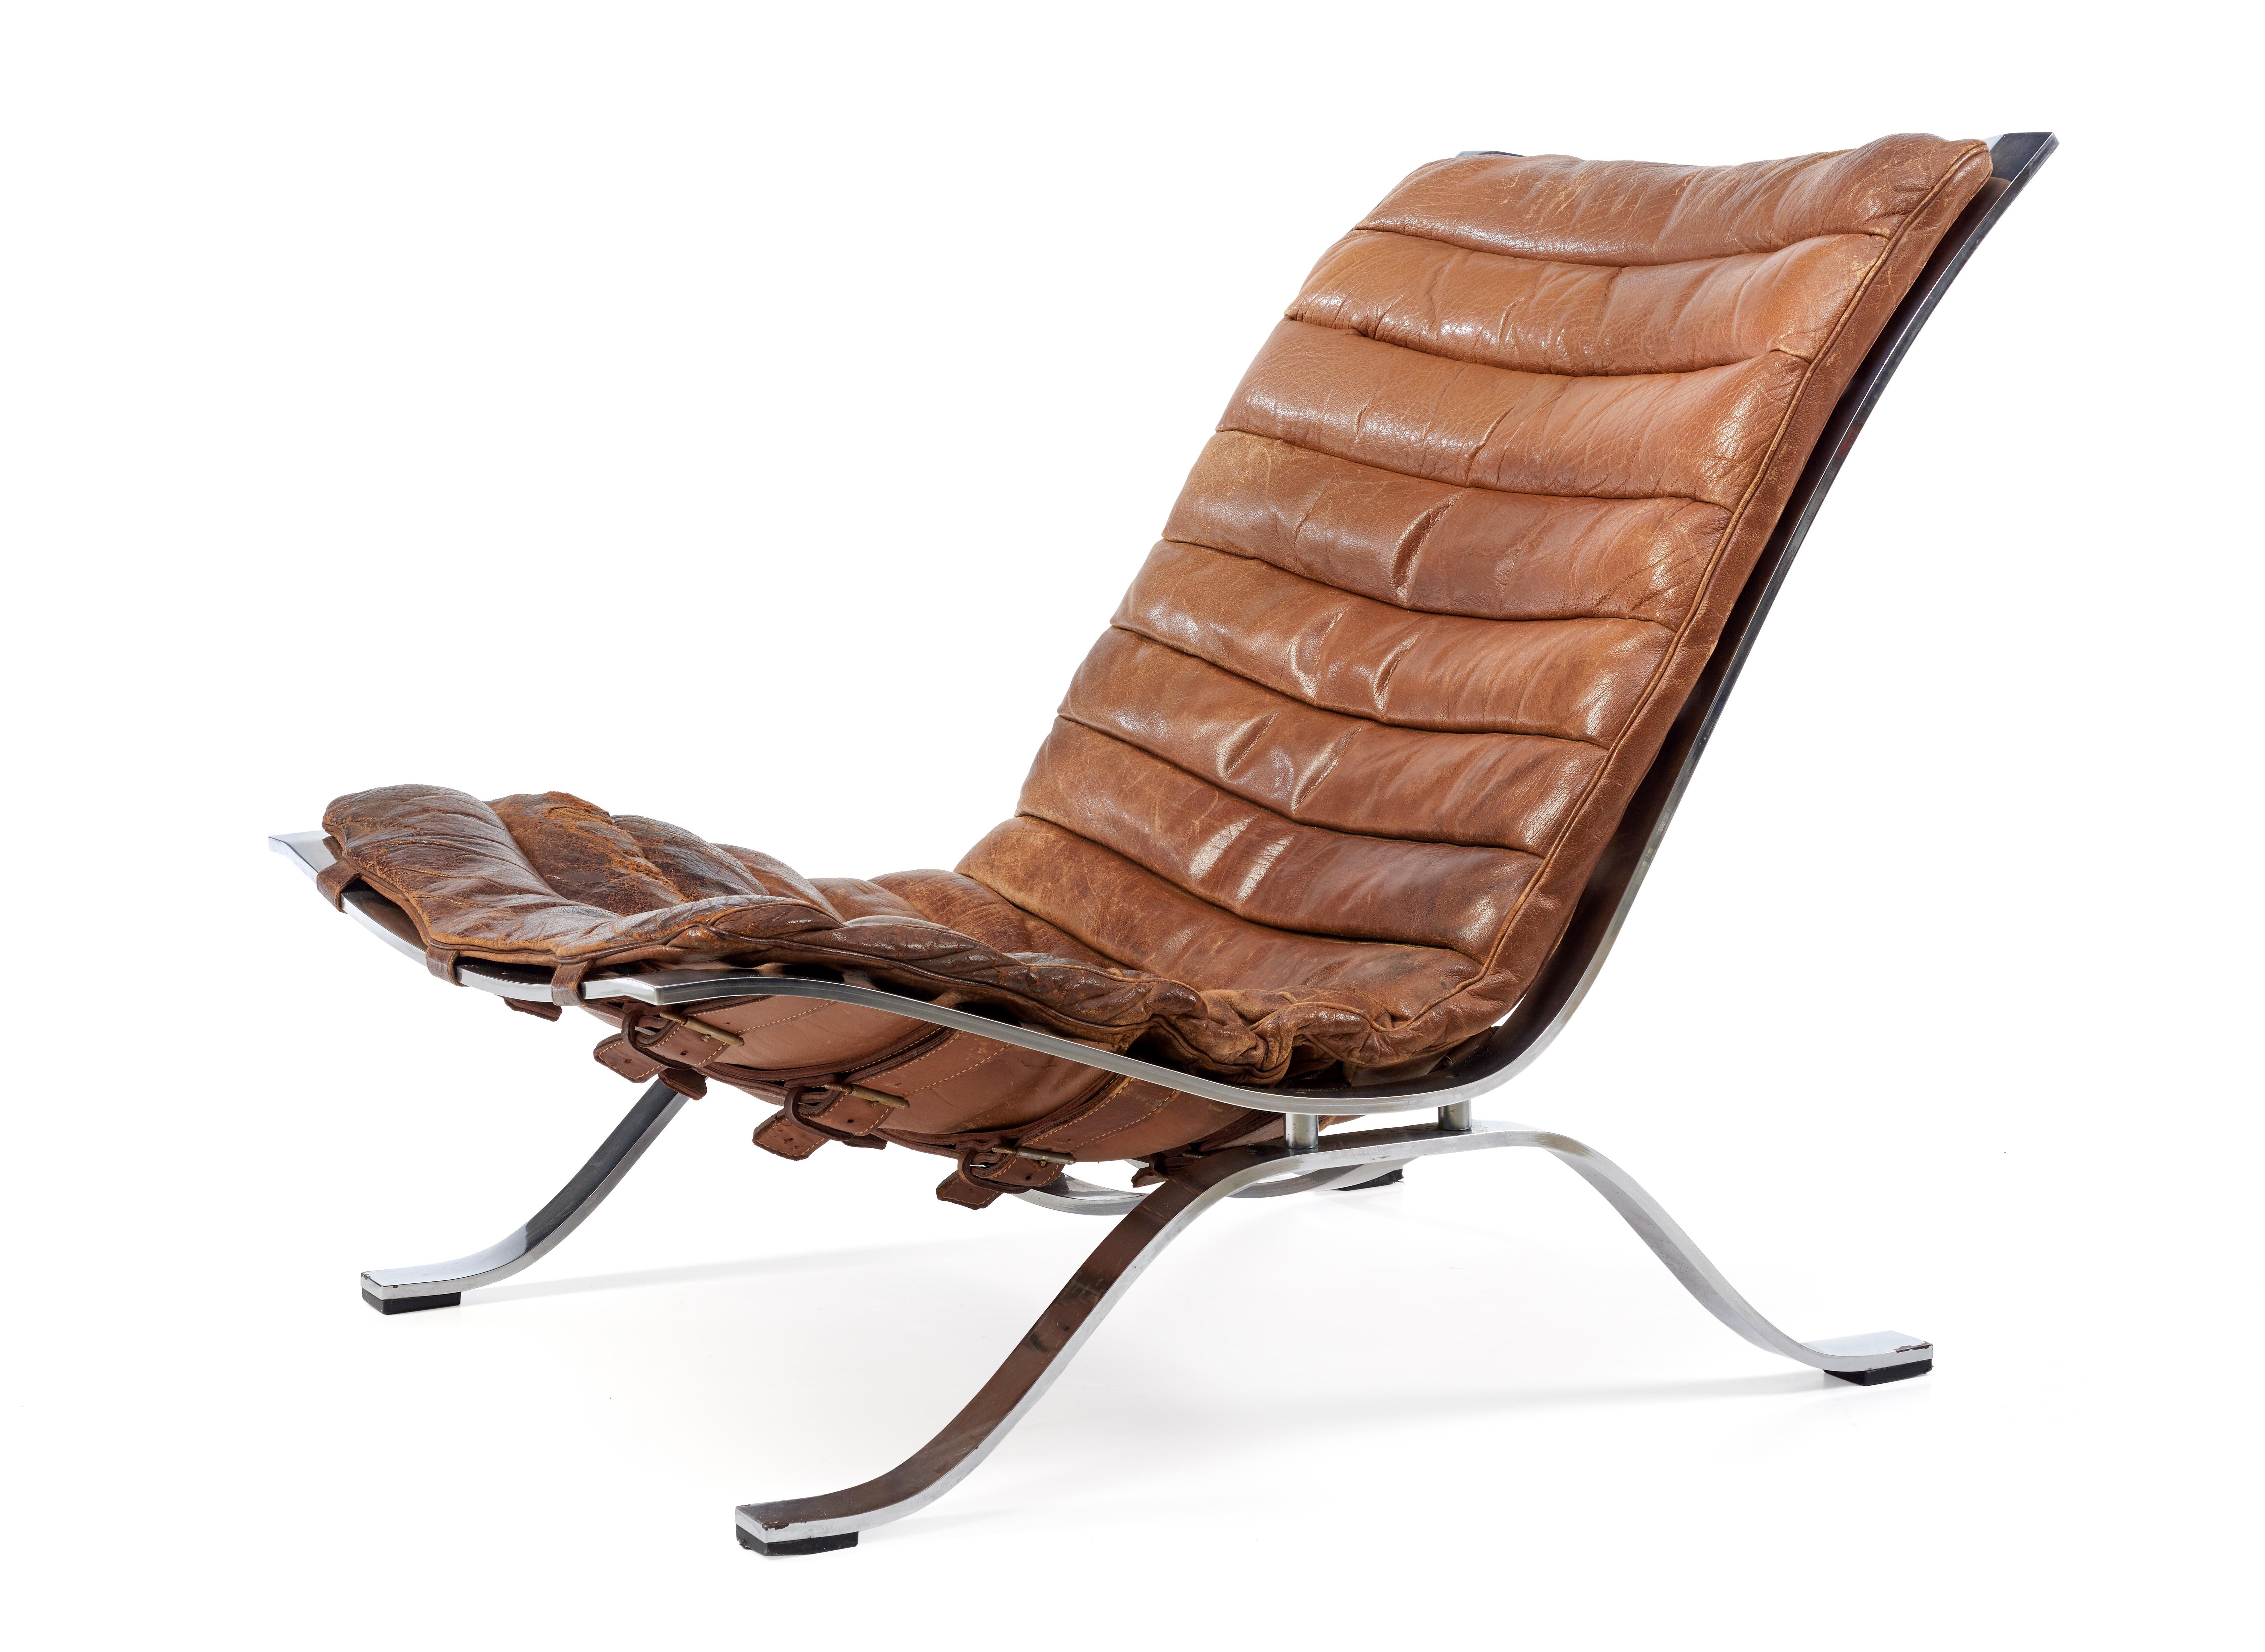 Steel Ari Lounge Chair by Arne Norell Leather, 1960s, Sweden For Sale